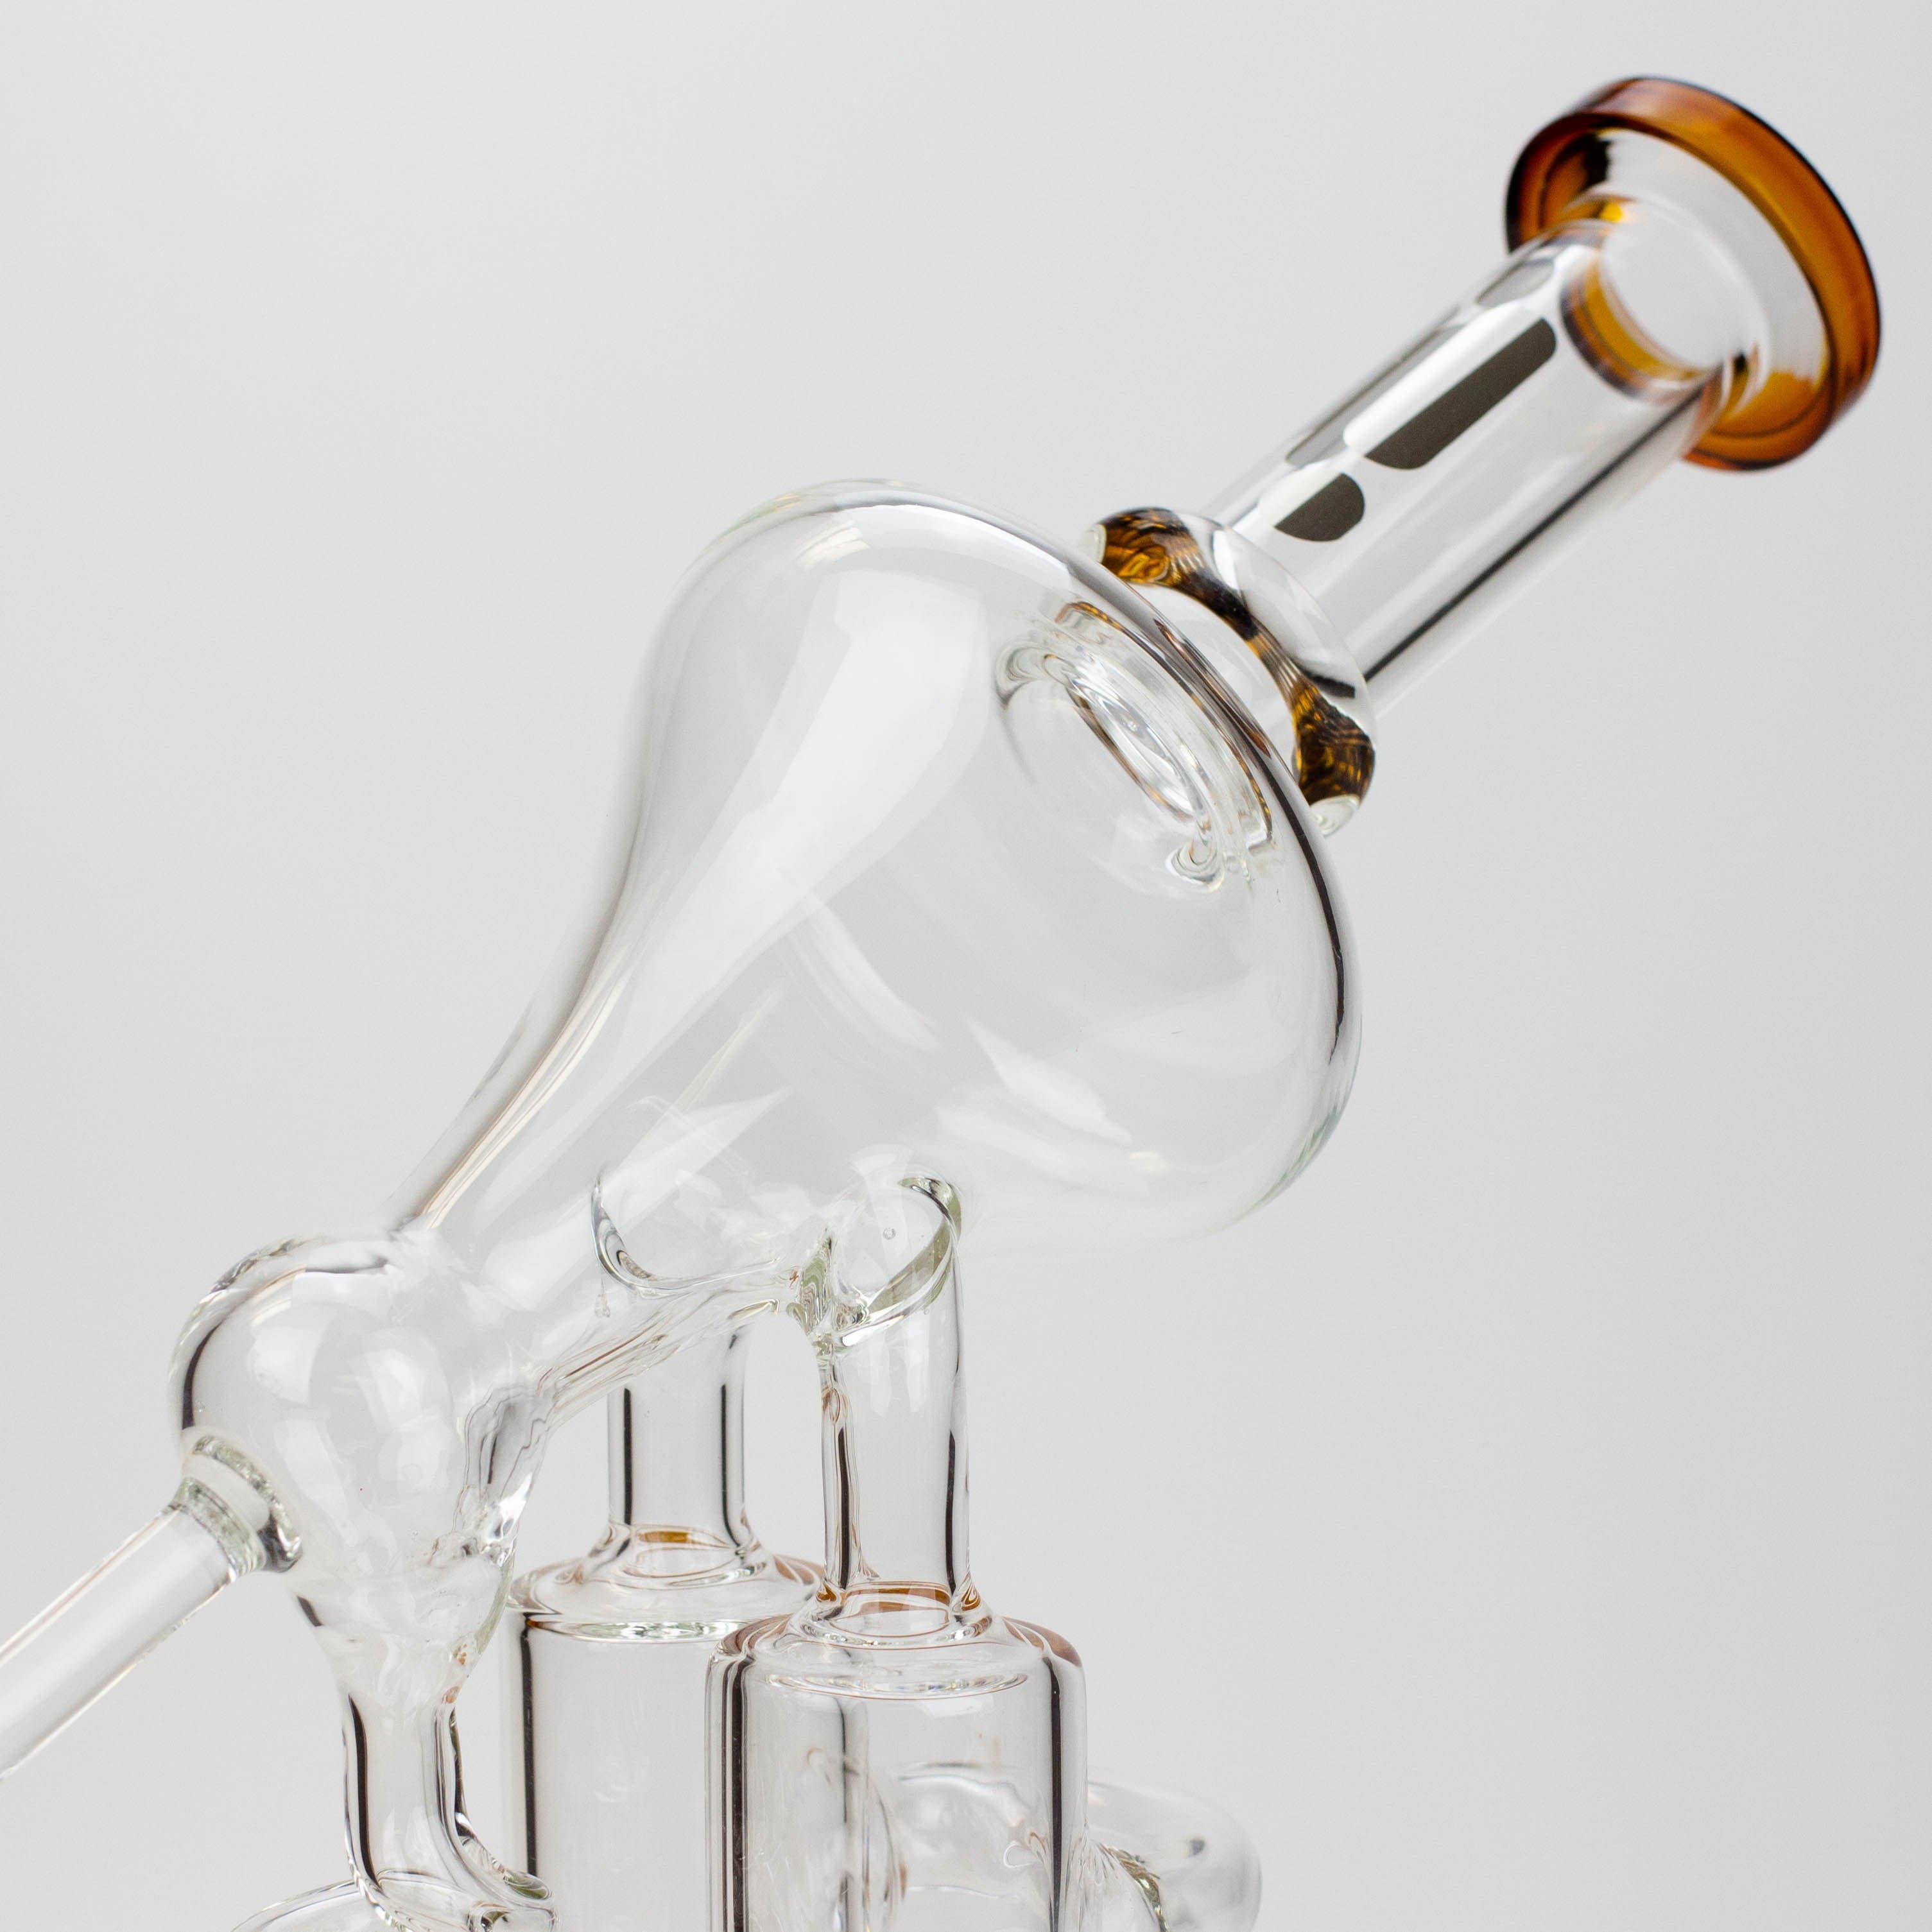 Infyniti coil, dual honeycome and flower diffuser glass recycler pipes 13"_8